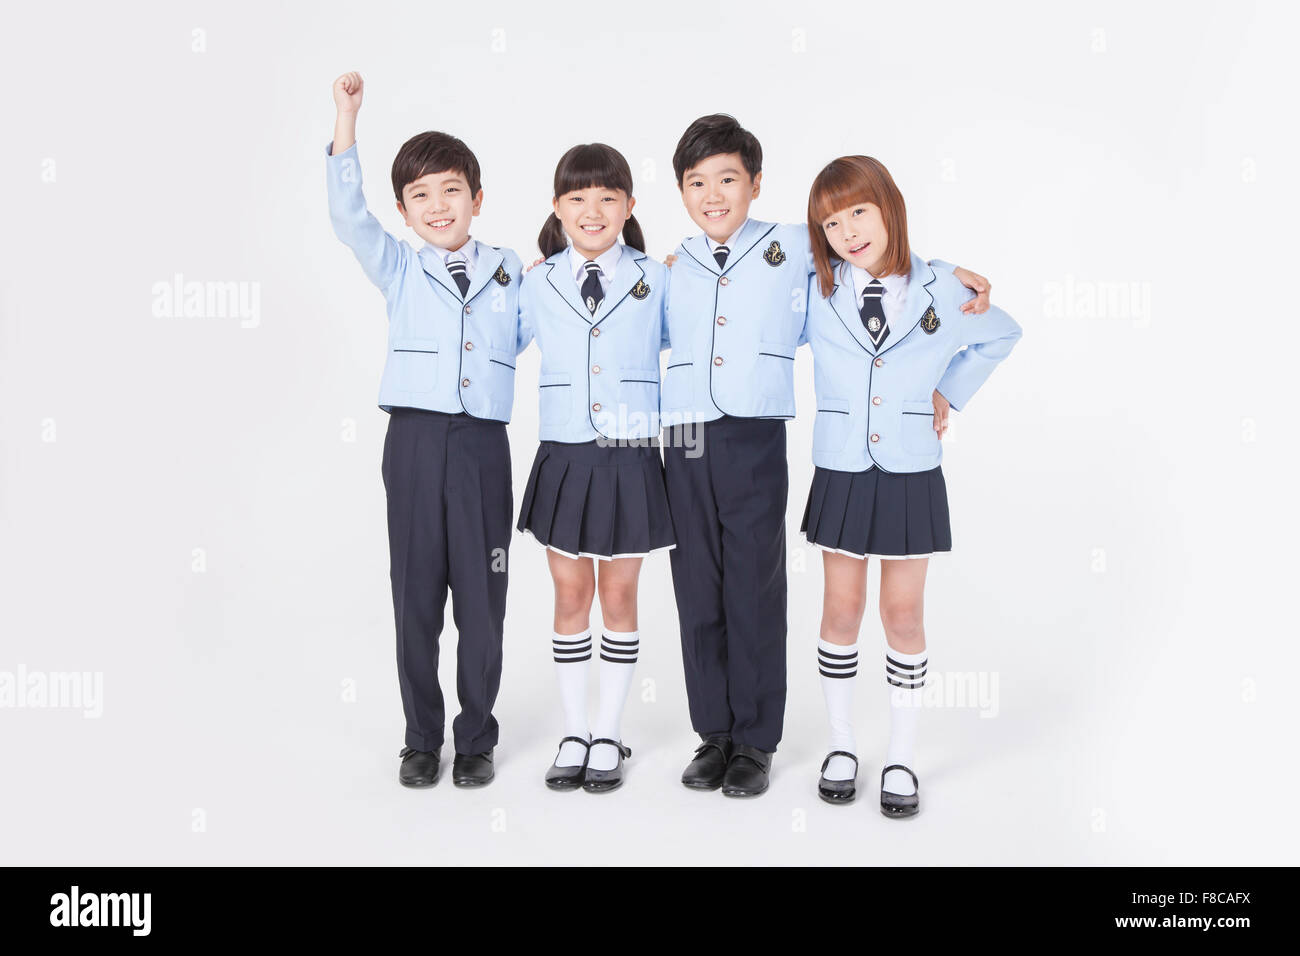 Four elementary school age kids standing together with their arms around each other and smiling Stock Photo